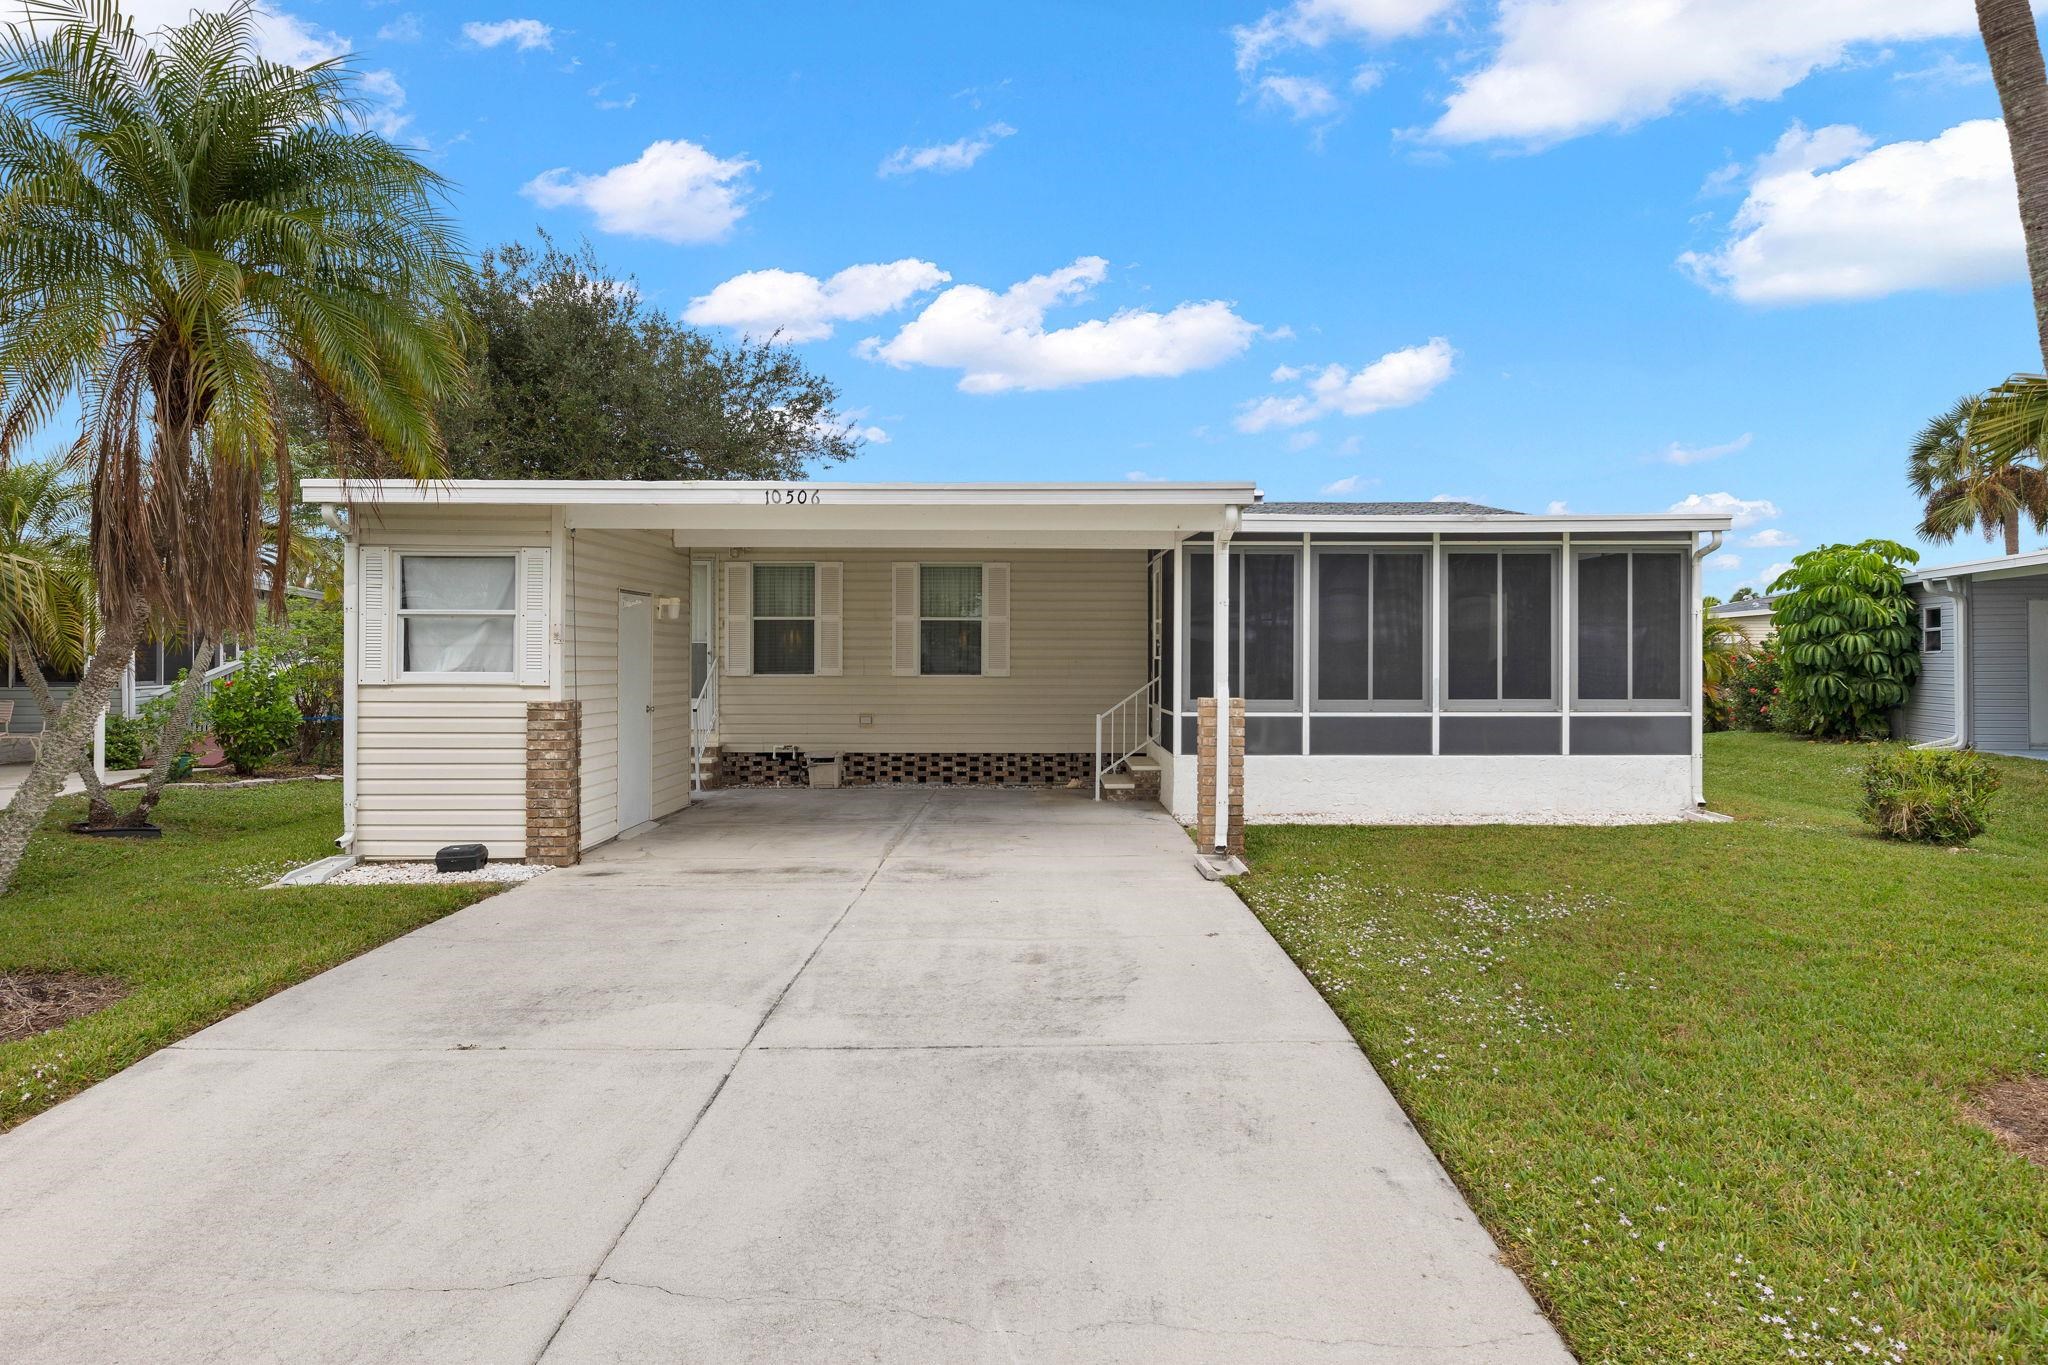 10506 Winchester Ct, Fort Myers, Florida 33908, 2 Bedrooms Bedrooms, ,2 BathroomsBathrooms,Residential,For Sale,Winchester Ct,2231119